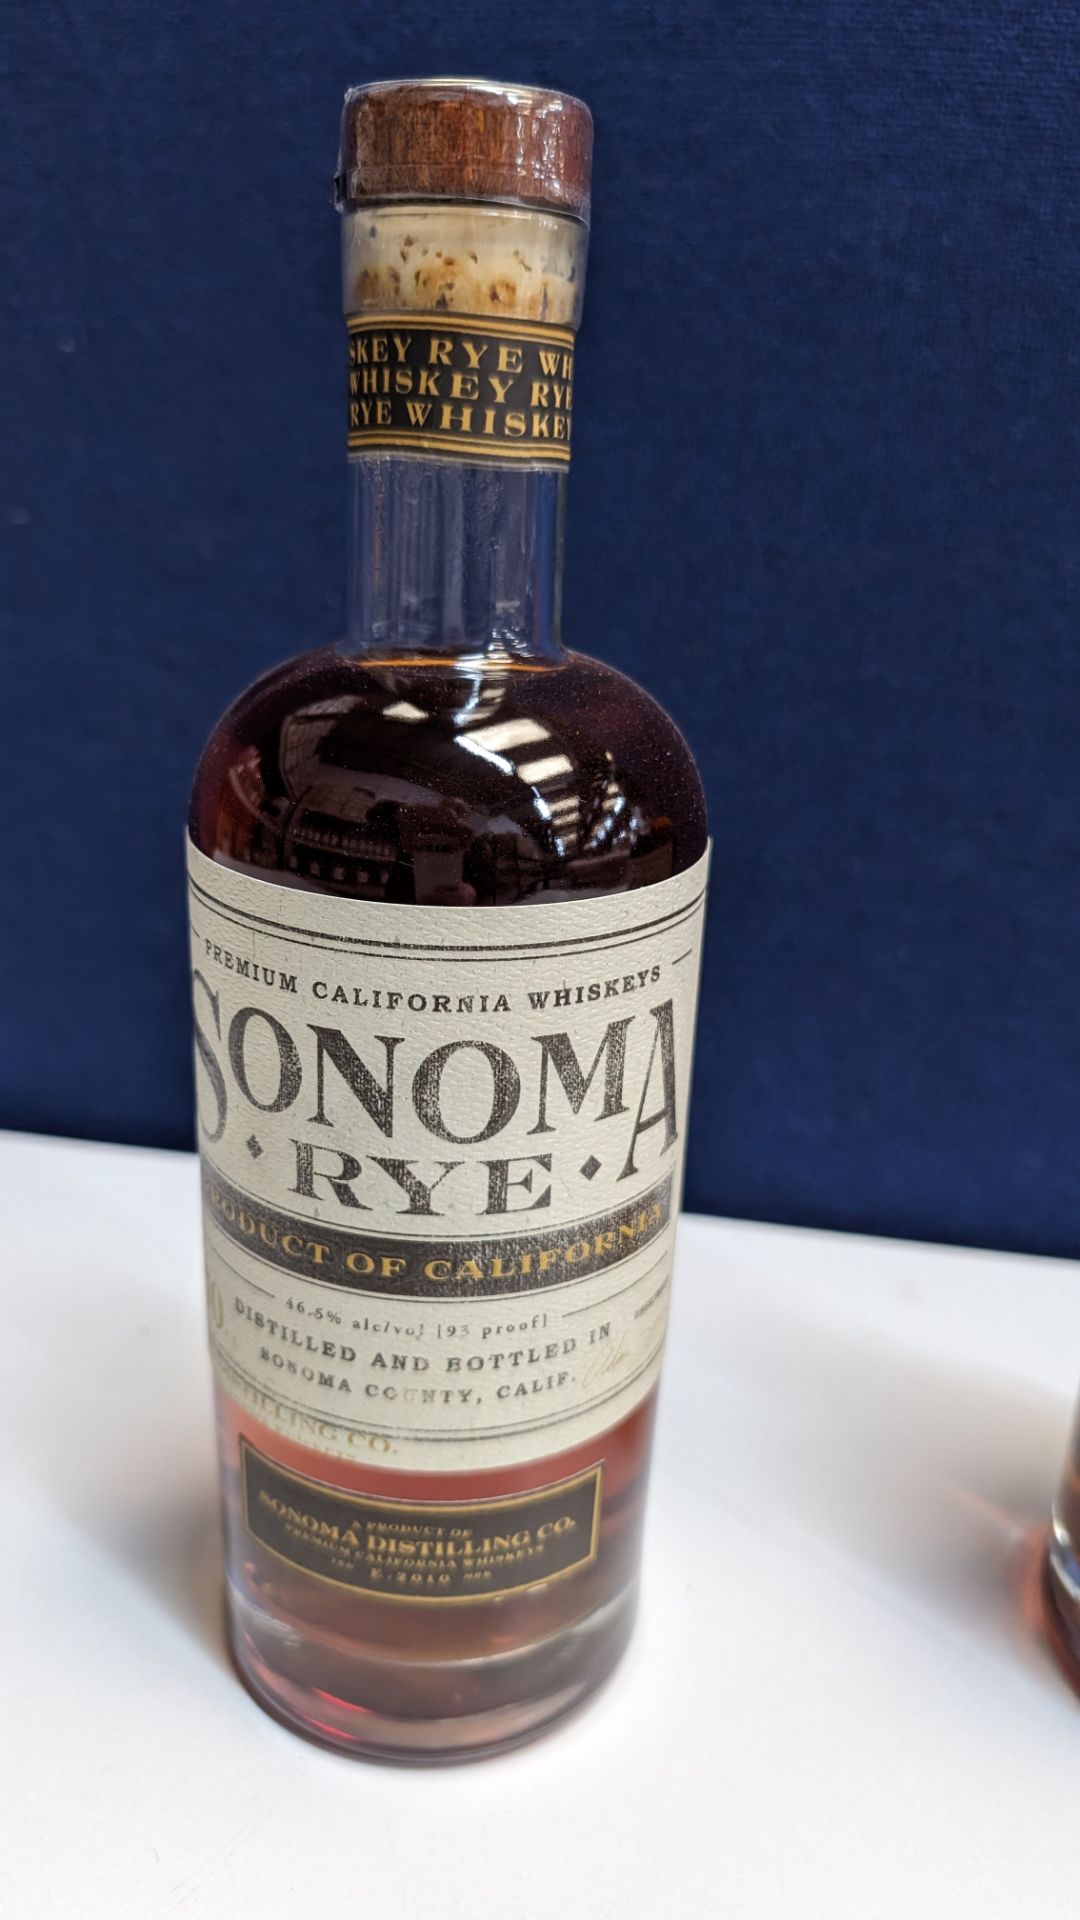 2 off 700ml bottles of Sonoma Rye Whiskey. 46.5% alc/vol (93 proof). Distilled and bottled in Sono - Image 3 of 8